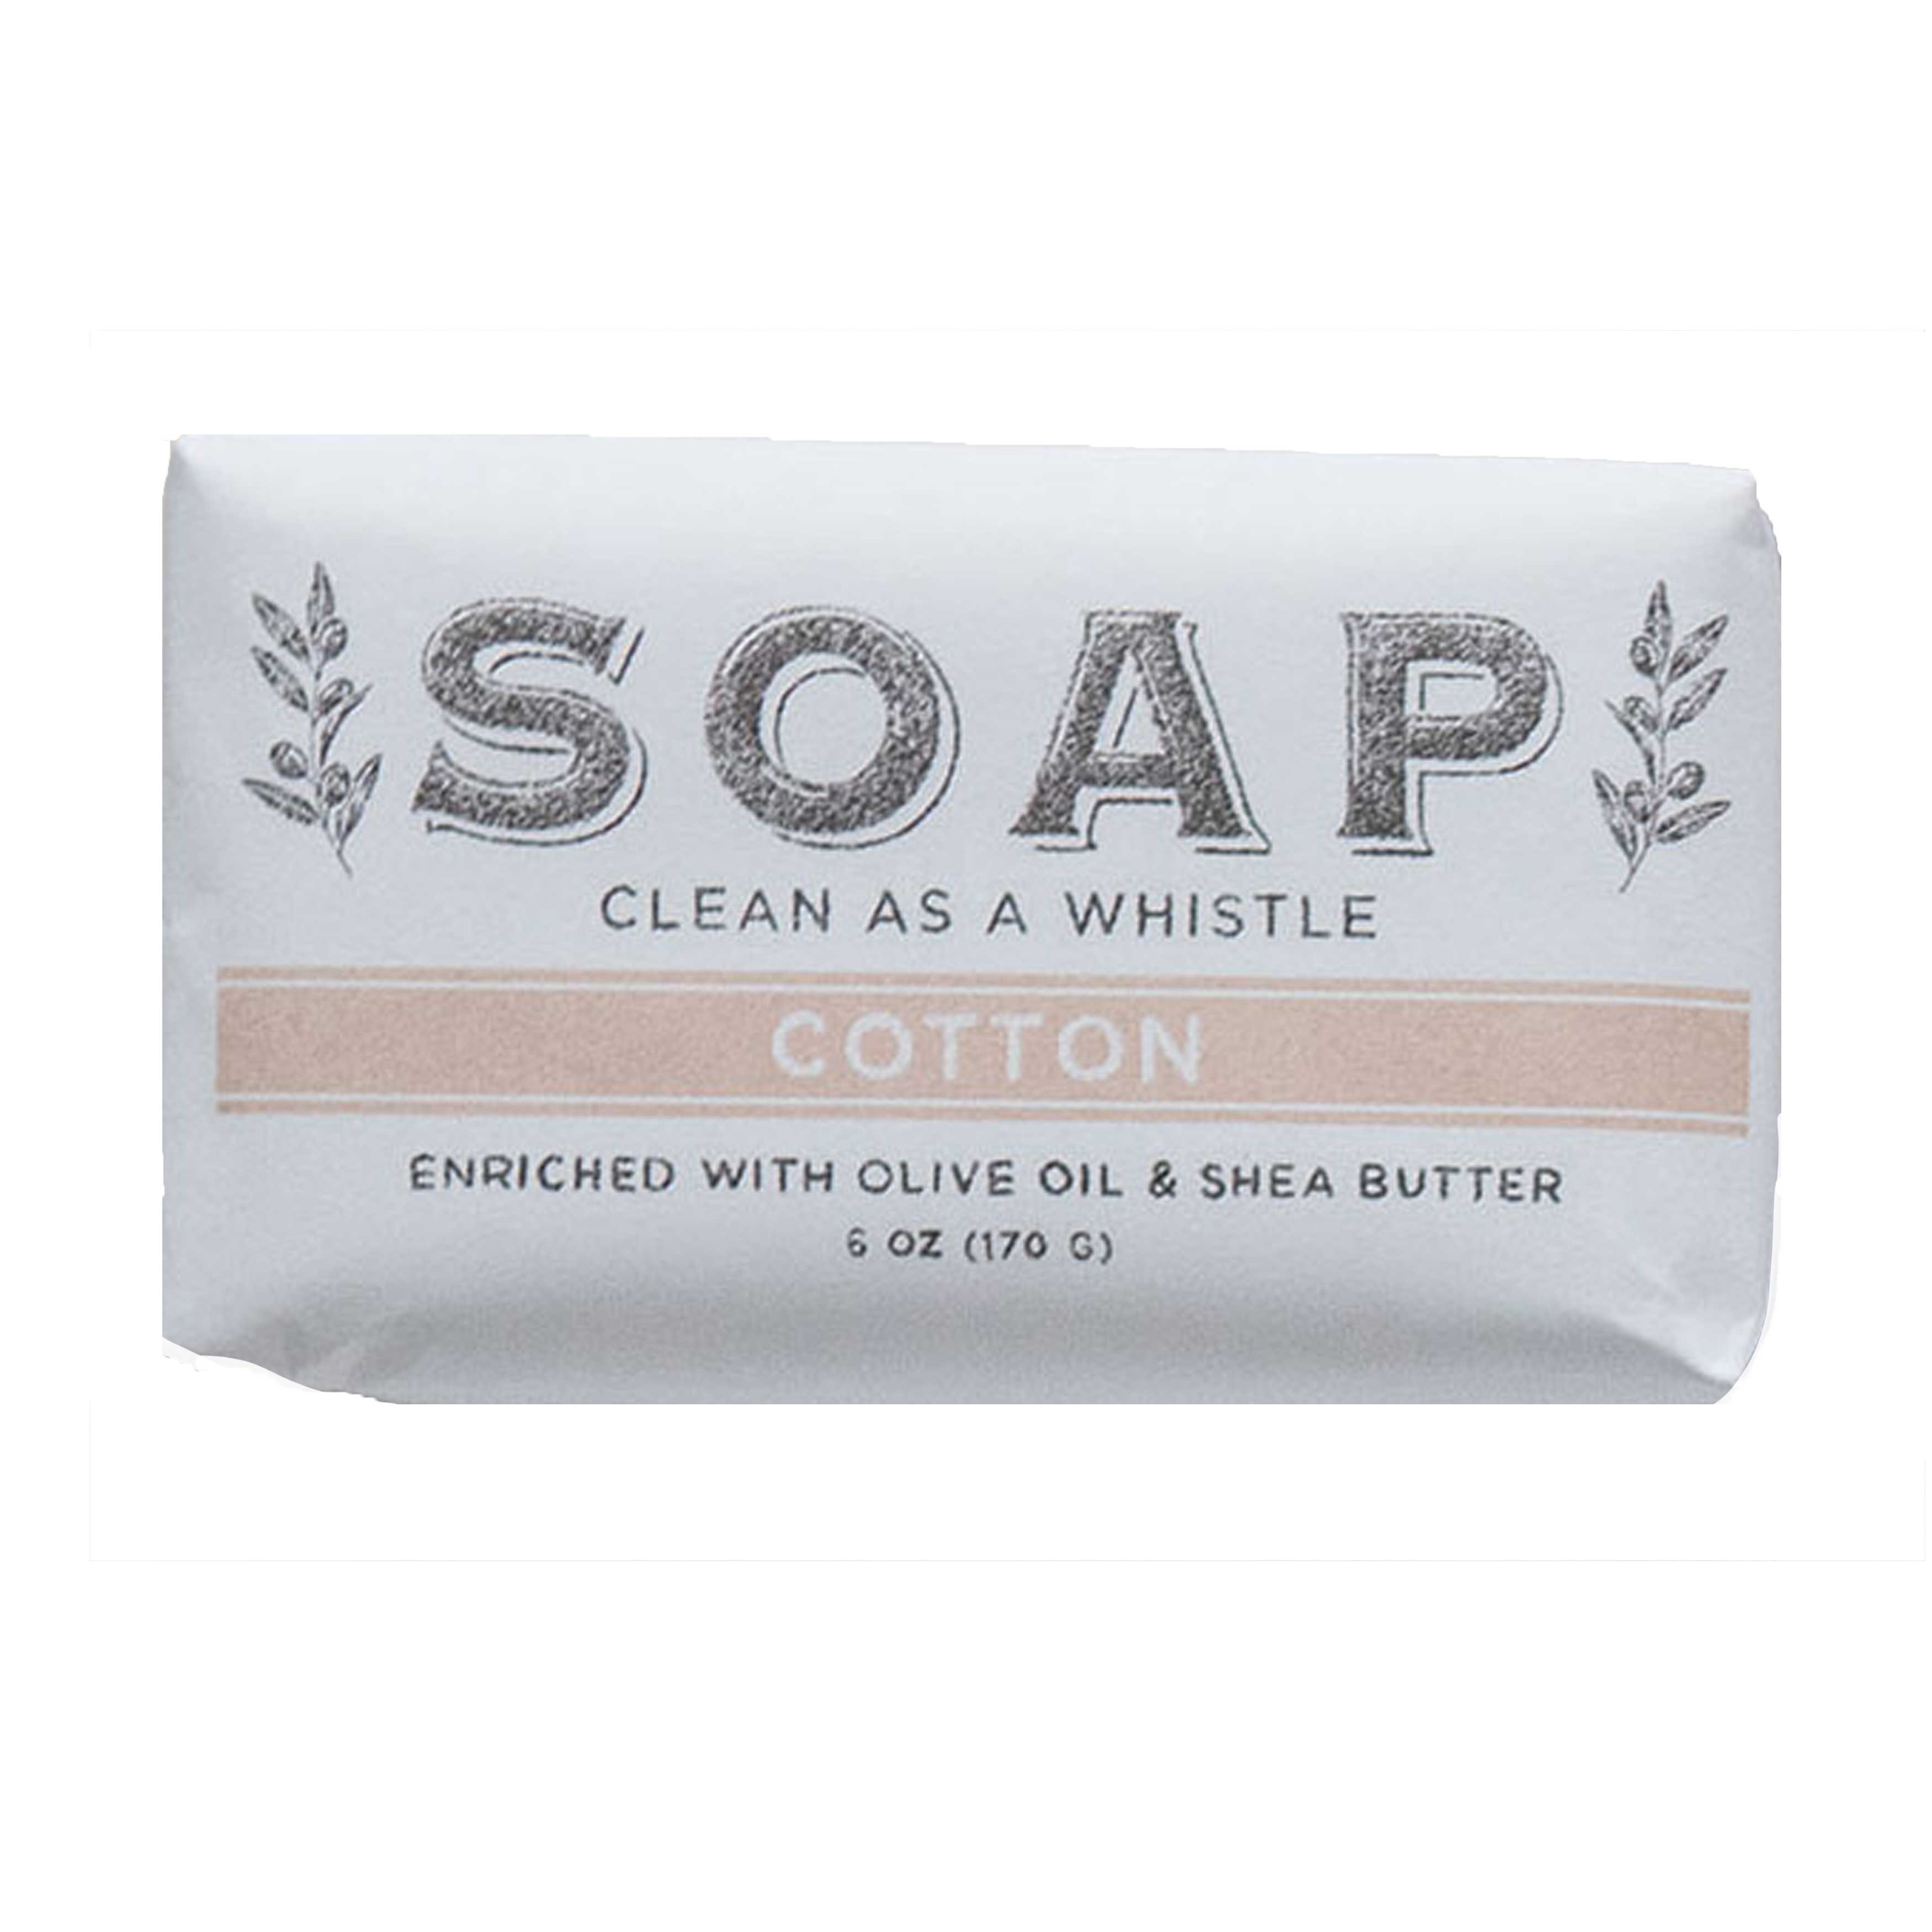 Olive Oil & Shea Butter Milled Soap - Cotton